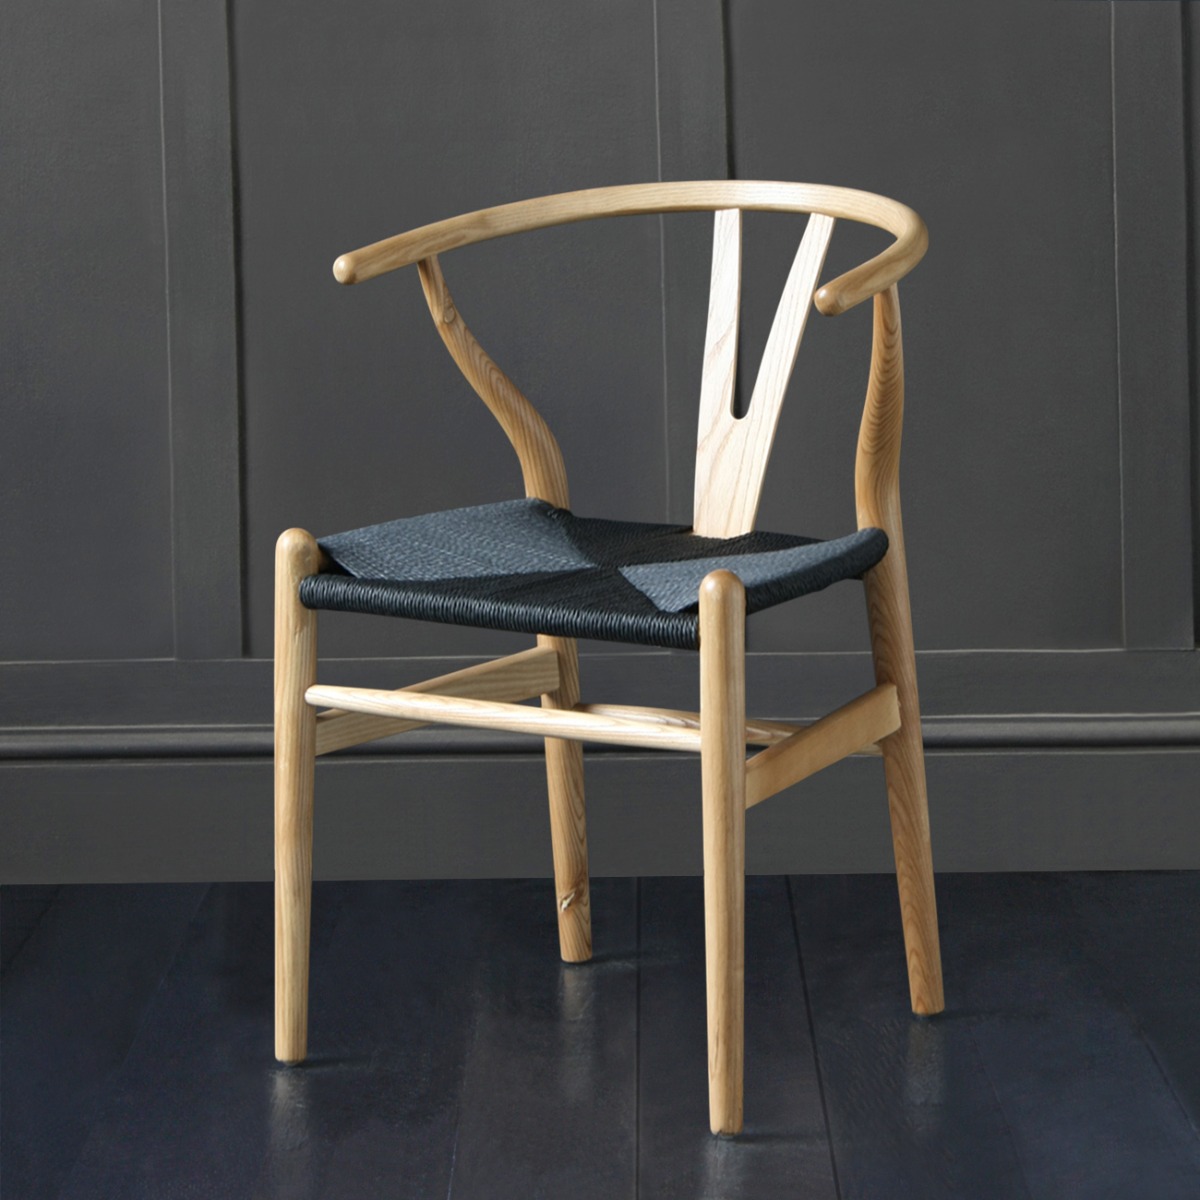 It's great to see our Wishbone Dining Chairs making Kate's list!